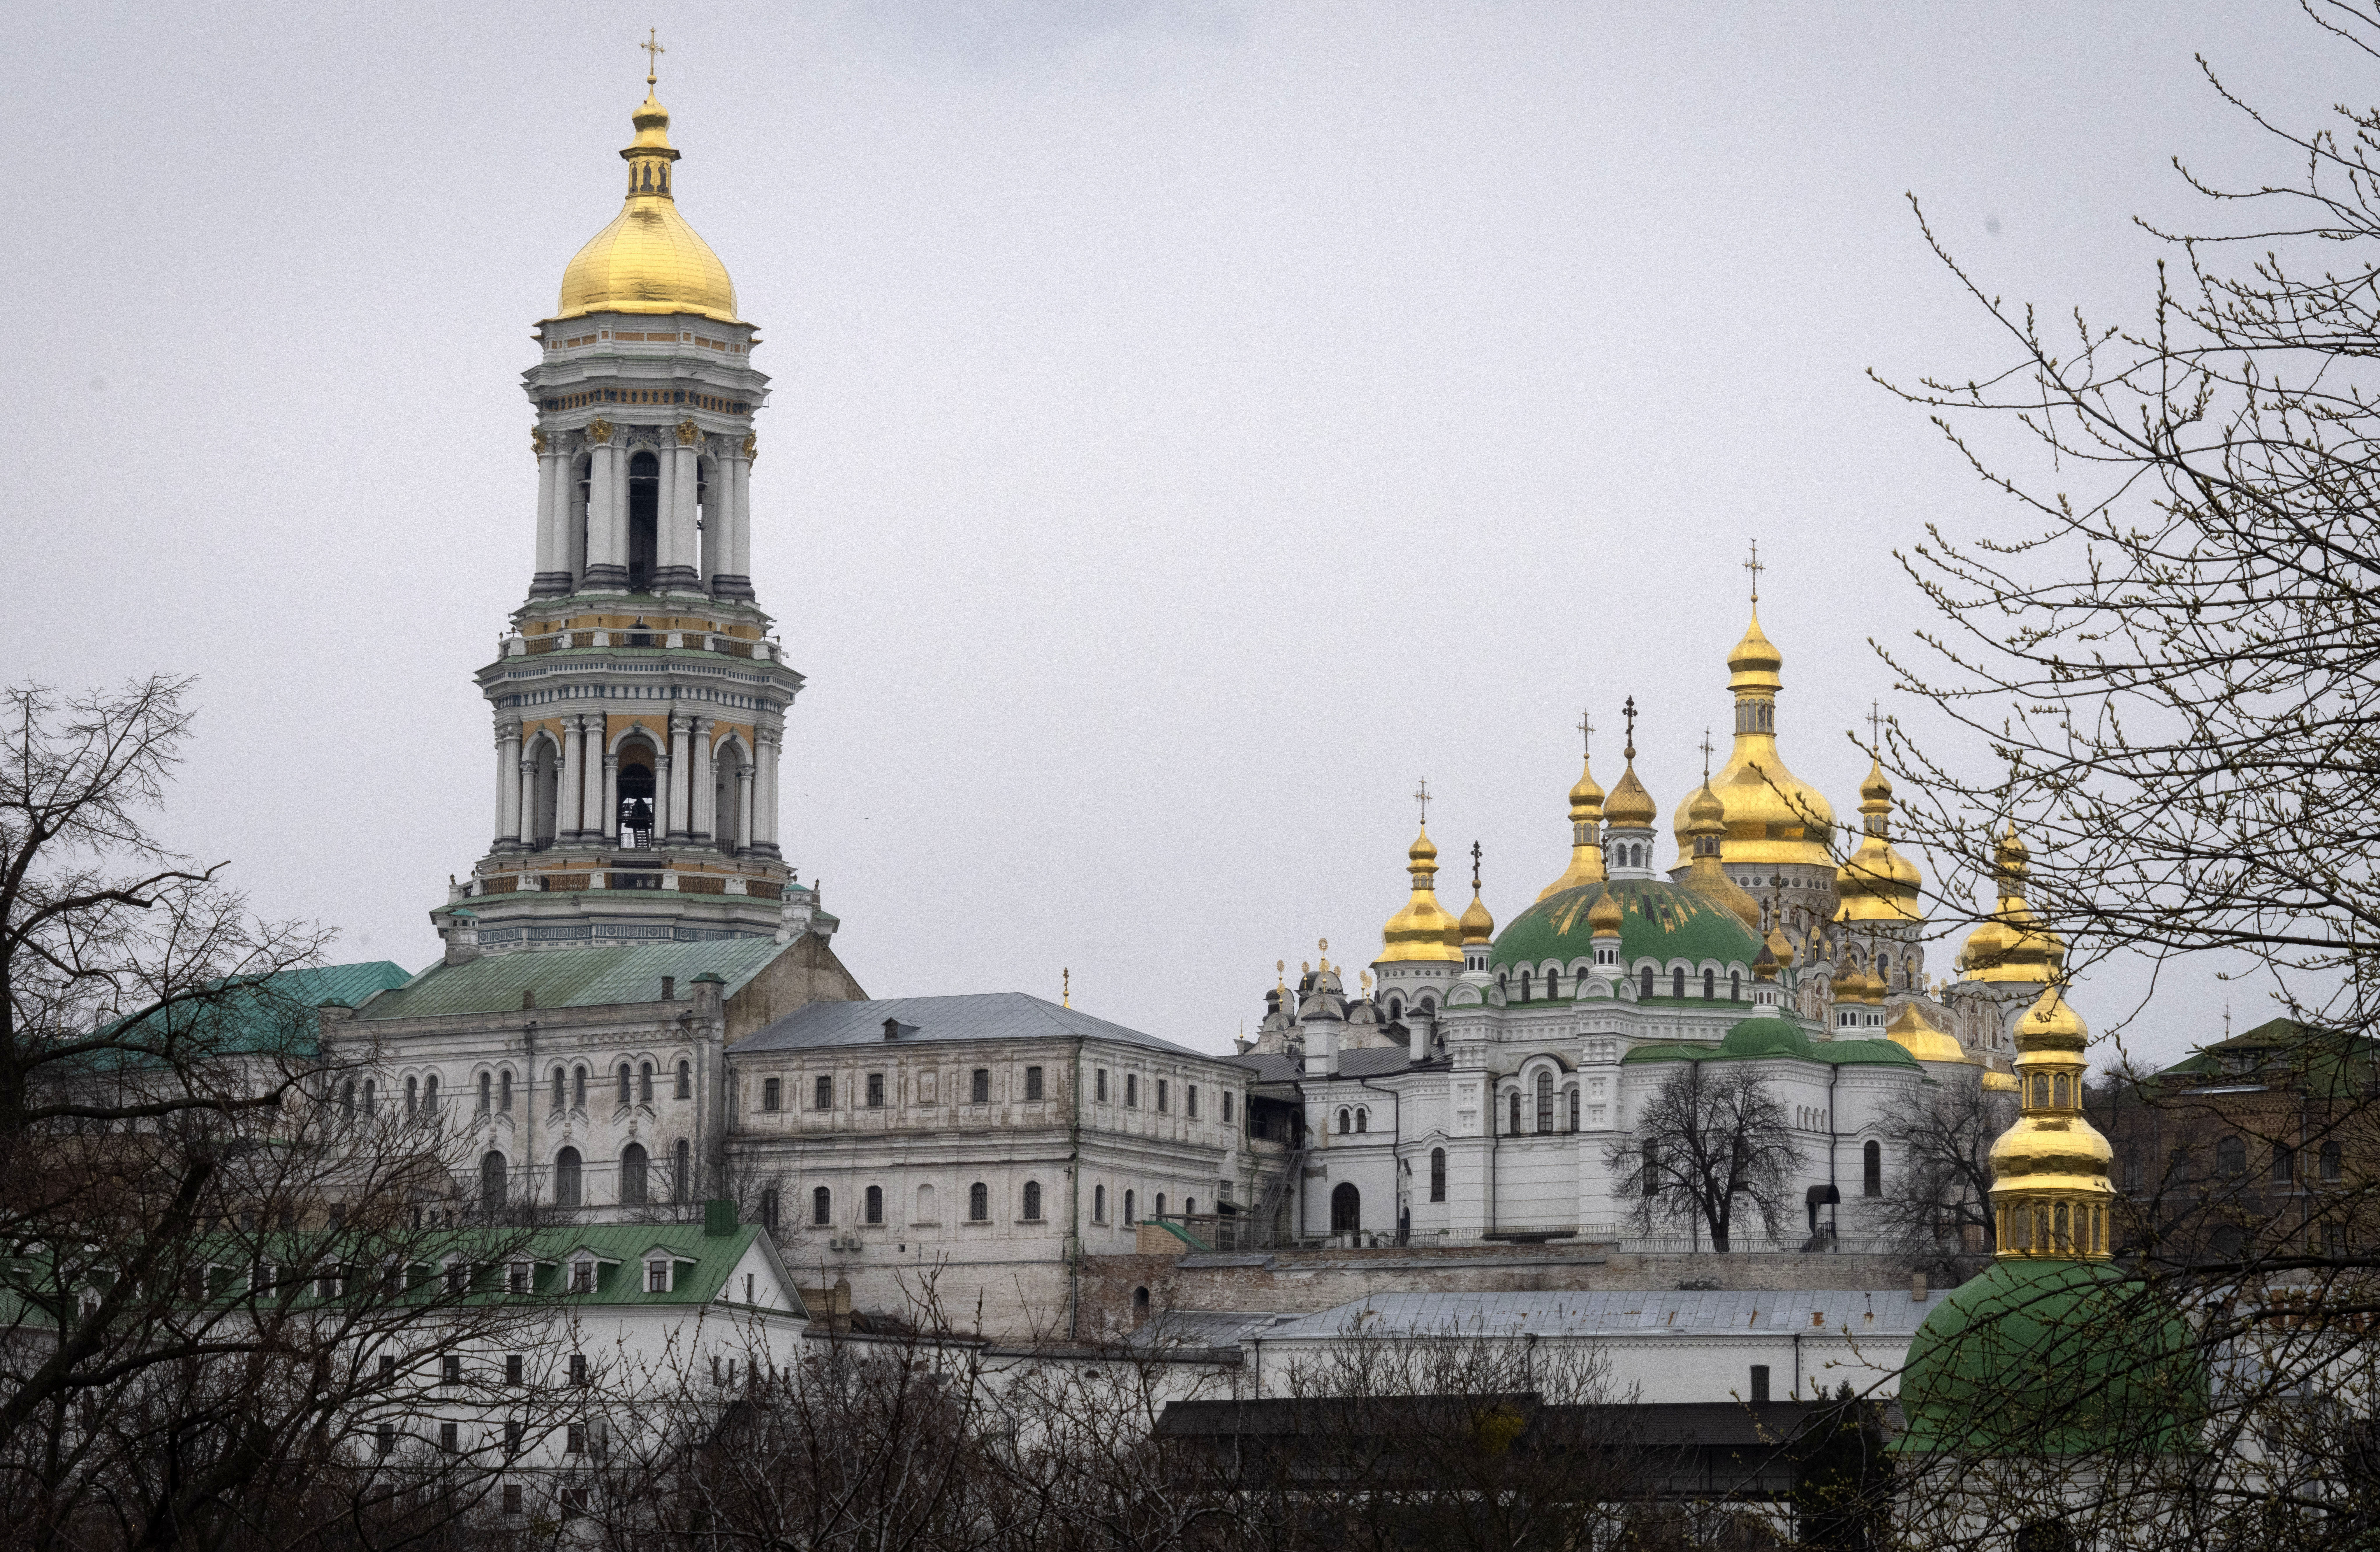 The Monastery of the Caves, also known as Kyiv-Pechersk Lavra, one of the holiest sites of Eastern Orthodox Christians, in Kyiv, Ukraine, Thursday, March 23, 2023. Tensions are on the rise at a prominent Orthodox monastery in Kyiv where the monks are facing eviction later this month. The Ukrainian government accuses the monks of links to Moscow, even though they claim to have severed ties with the Russian Orthodox Church following Russia's full-scale of invasion of Ukraine. (AP Photo/Efrem Lukatsky)